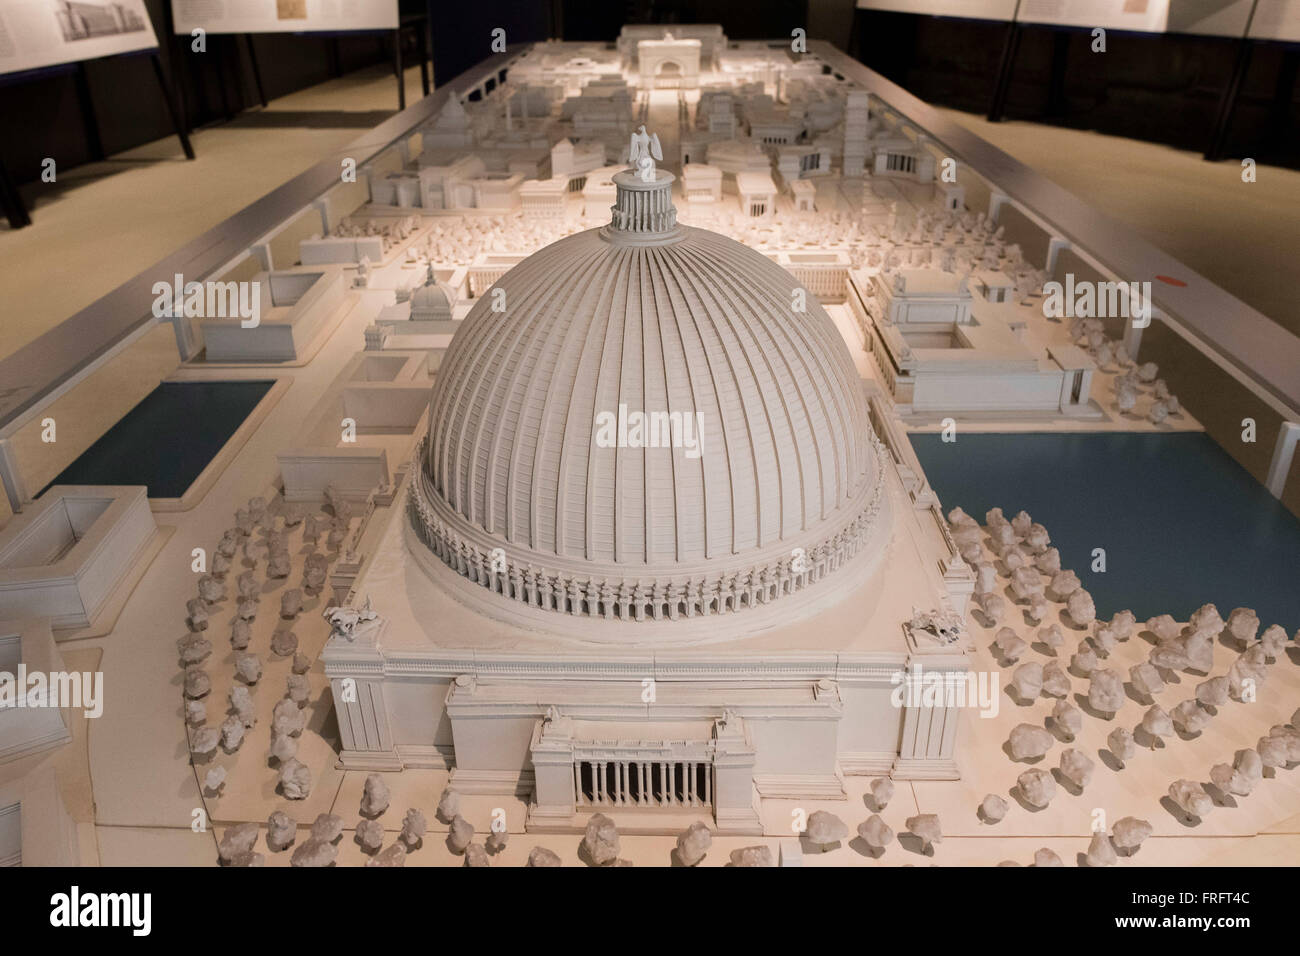 Berlin, Germany. 22nd Mar, 2016. A model of the 'great hall' at the north-south axis of the planned city of Germania, by Nazi architect Albert Speer, in the form of an original film set from the film Downfall, part of the exhibition Mythos Germania - Vision und Verbrechen at the Berliner Unterwelten museum in Berlin, Germany, 22 March 2016. PHOTO: GREGOR FISCHER/DPA/Alamy Live News Stock Photo